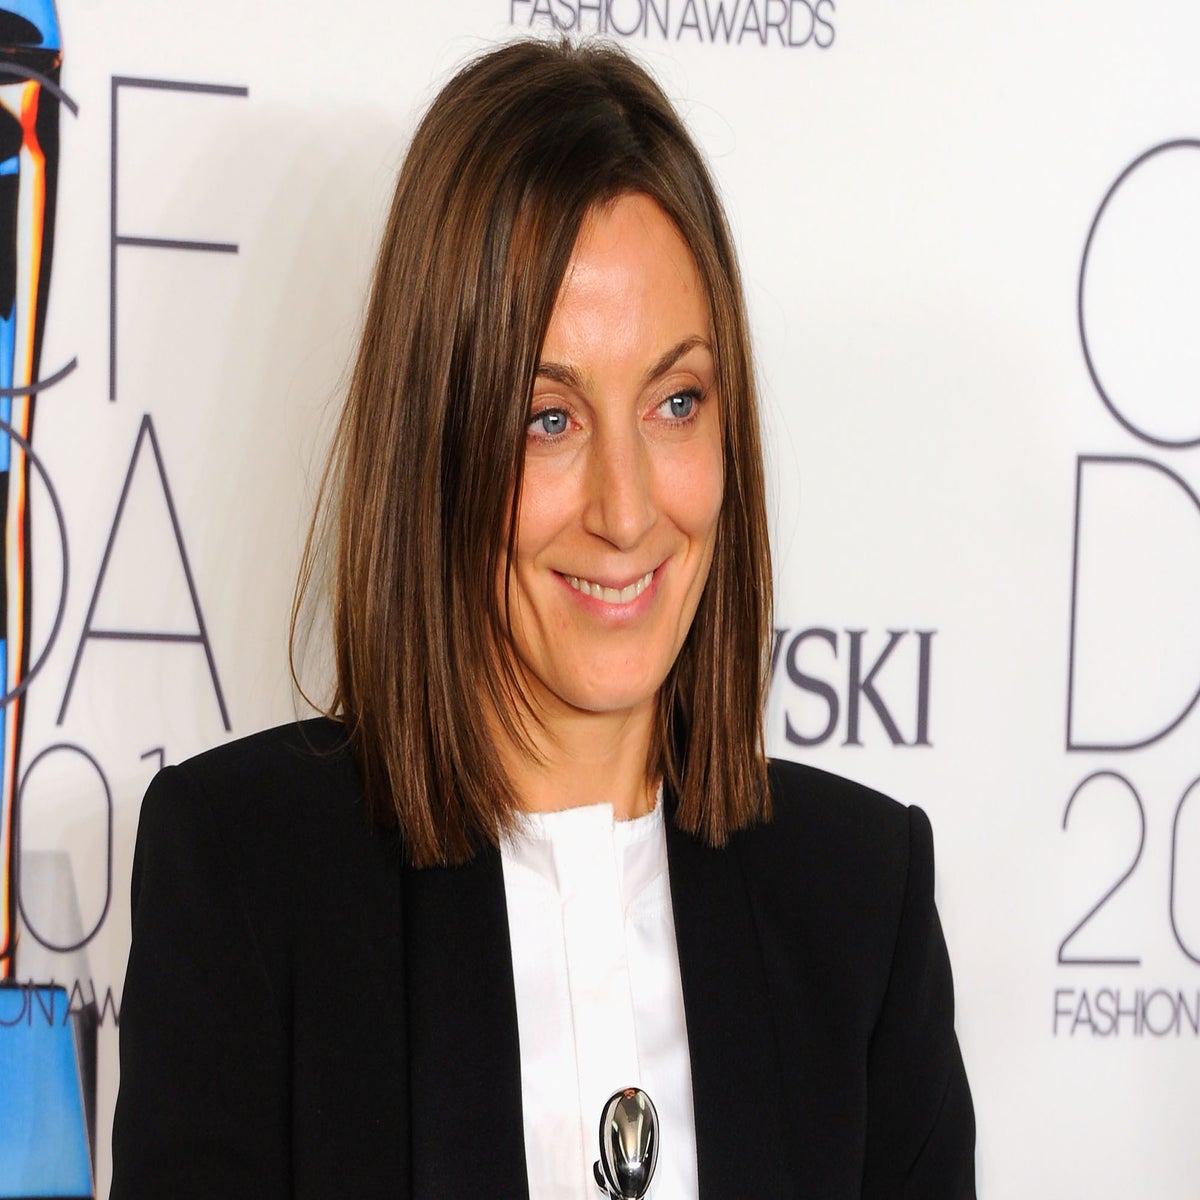 Phoebe Philo's Fashion Brand Has Finally Launched — Here's What To